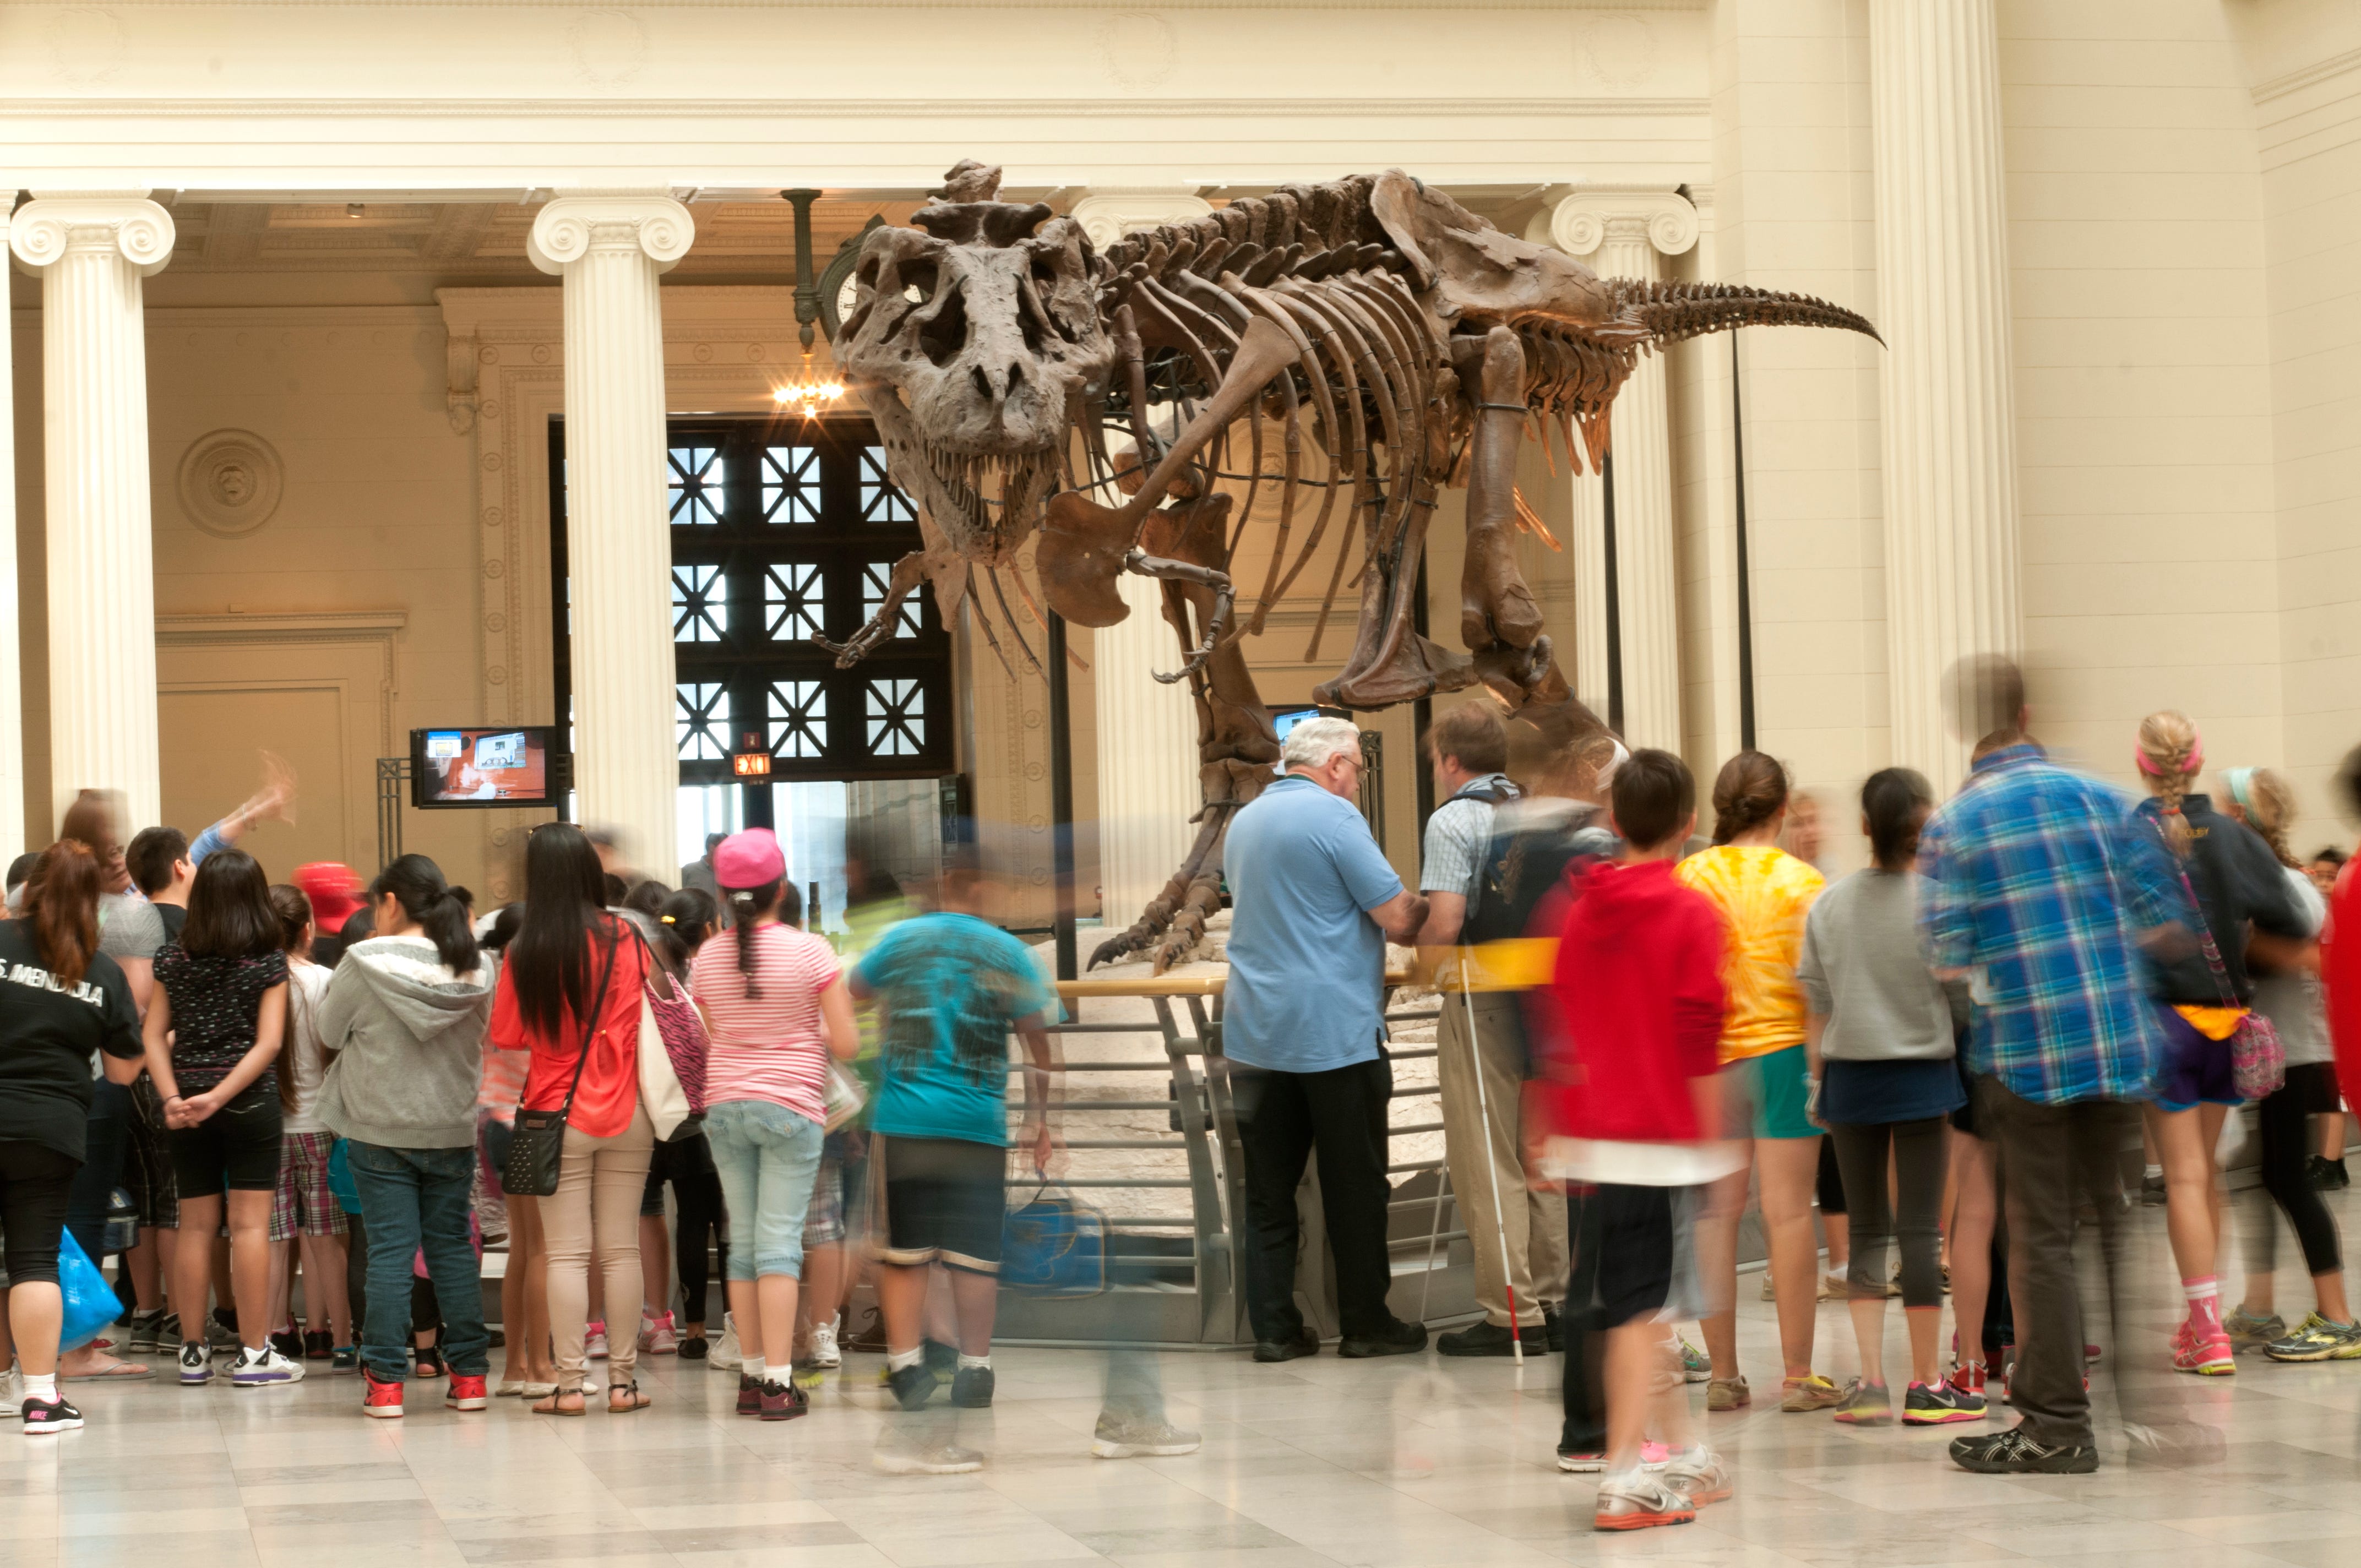 National Museum Day: 20 most-visited museums in the USA